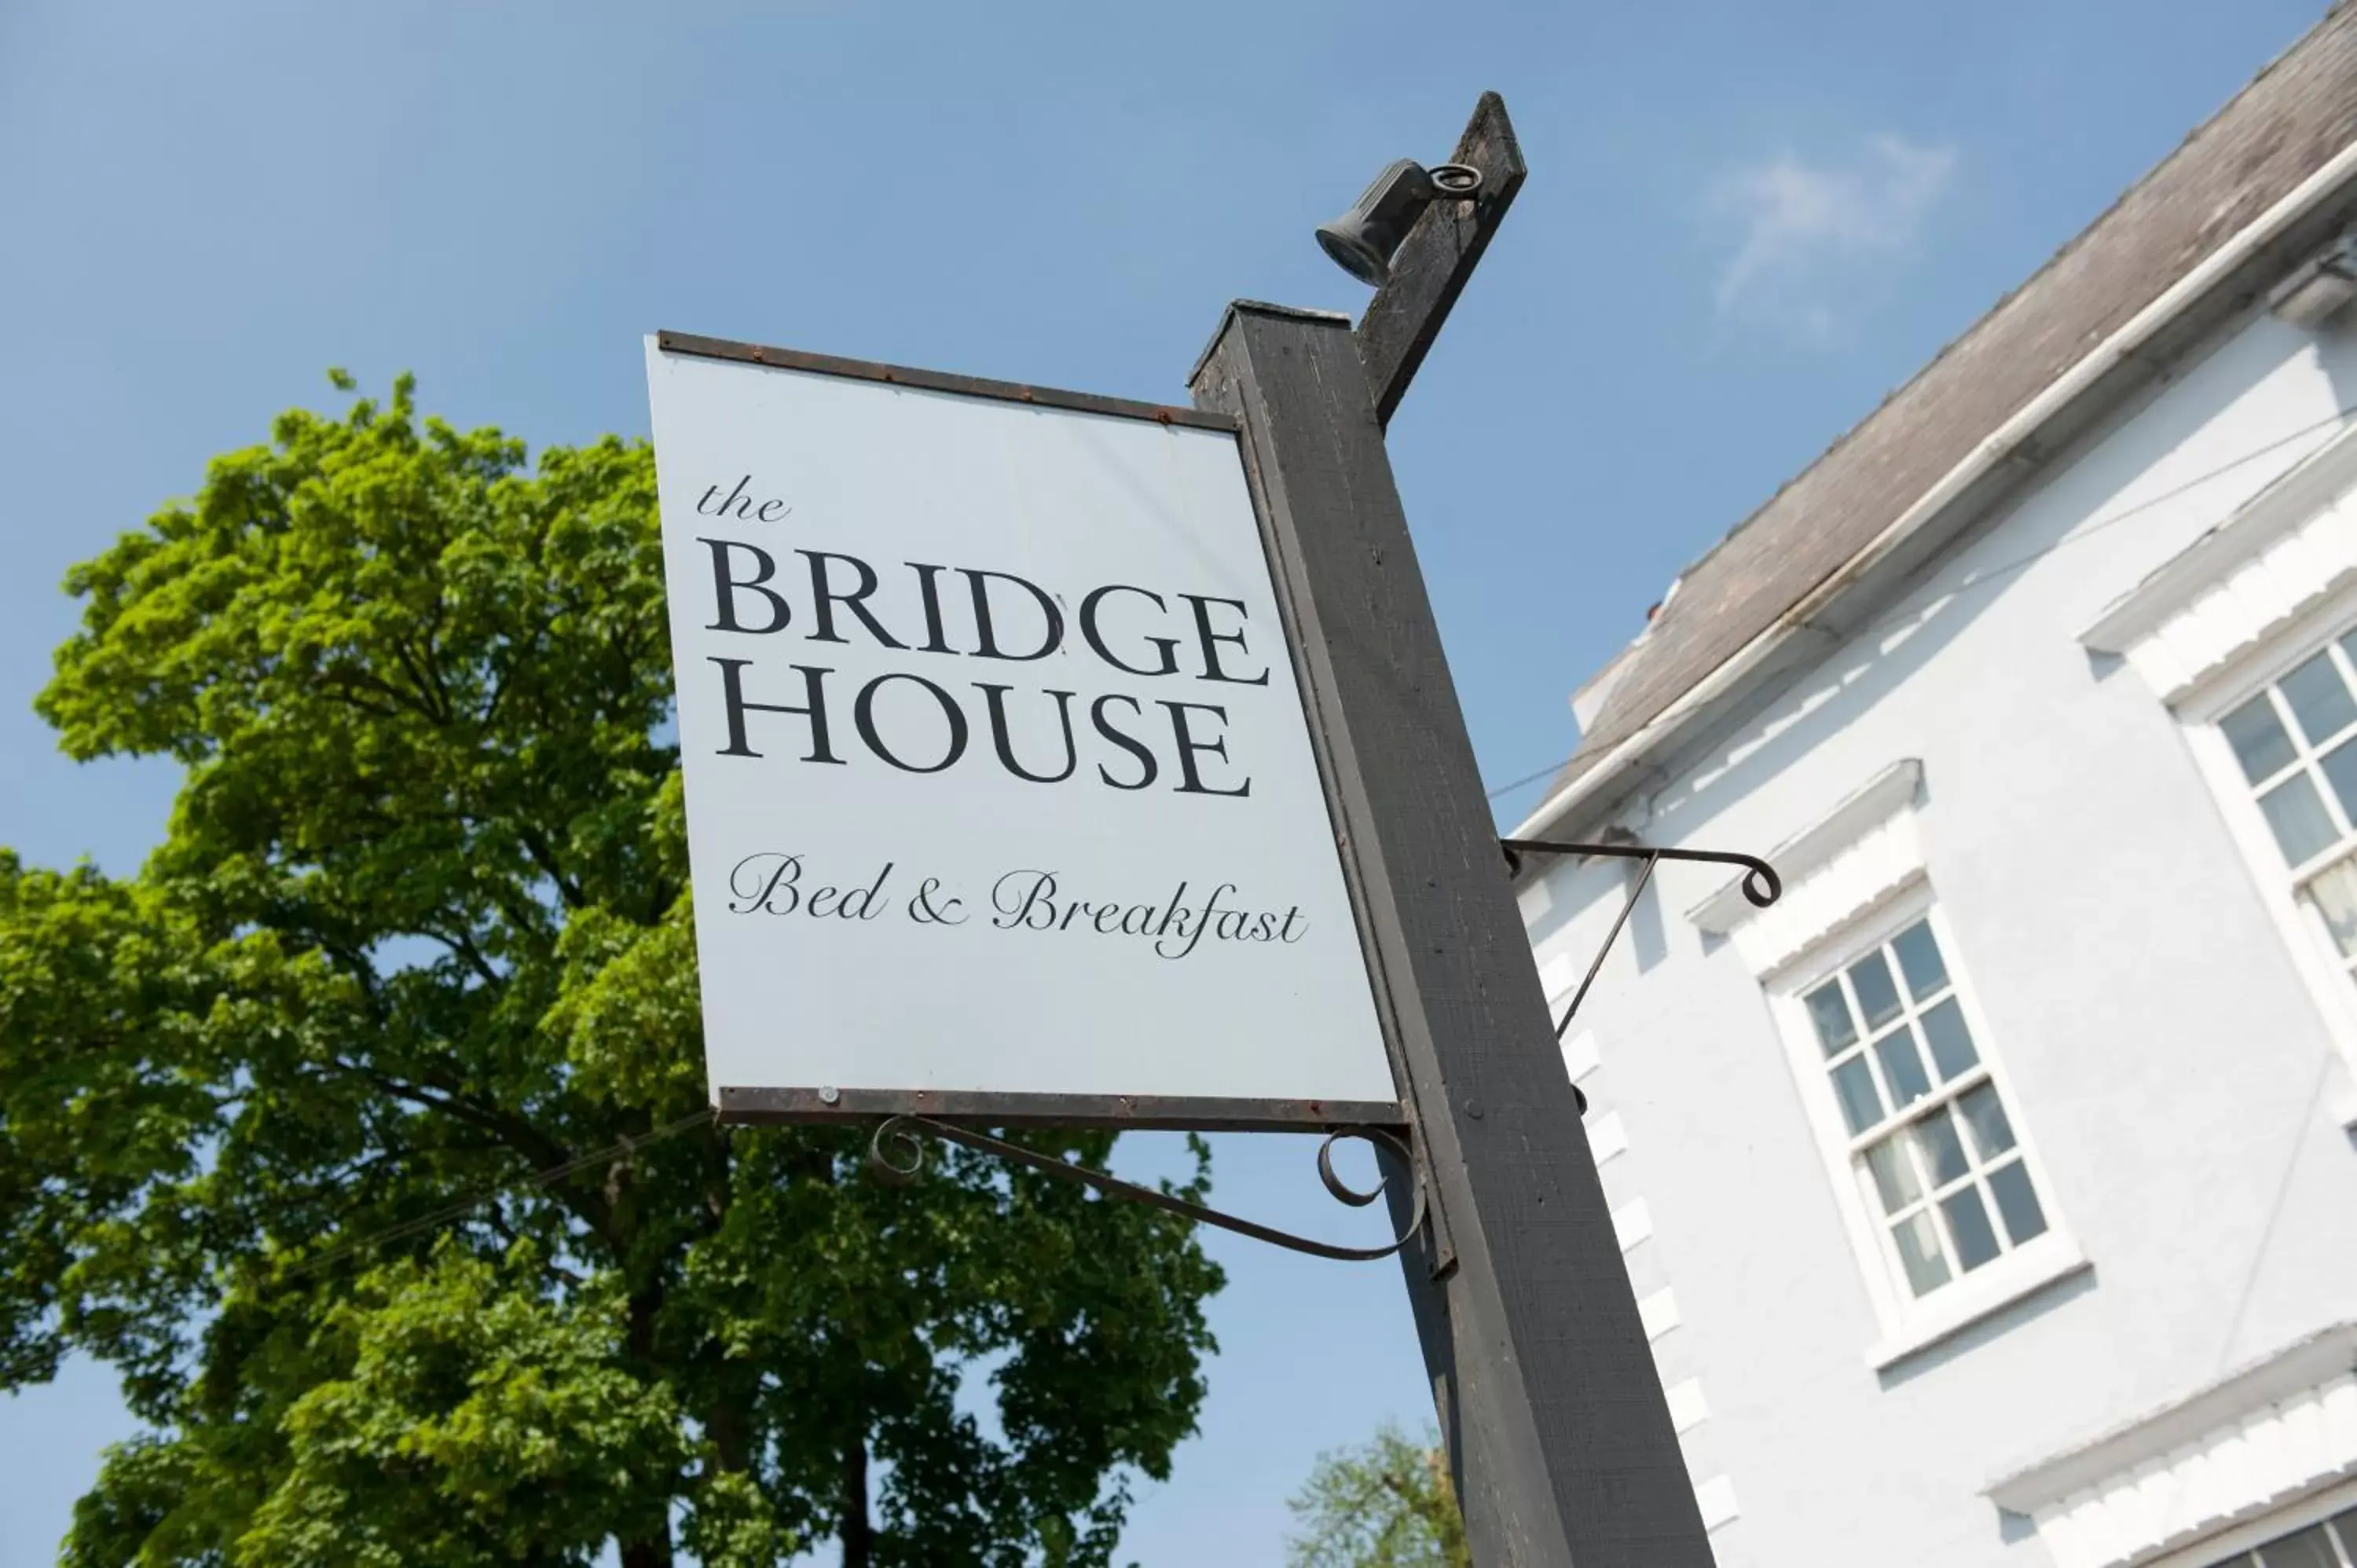 Property logo or sign, Logo/Certificate/Sign/Award in The Bridge House